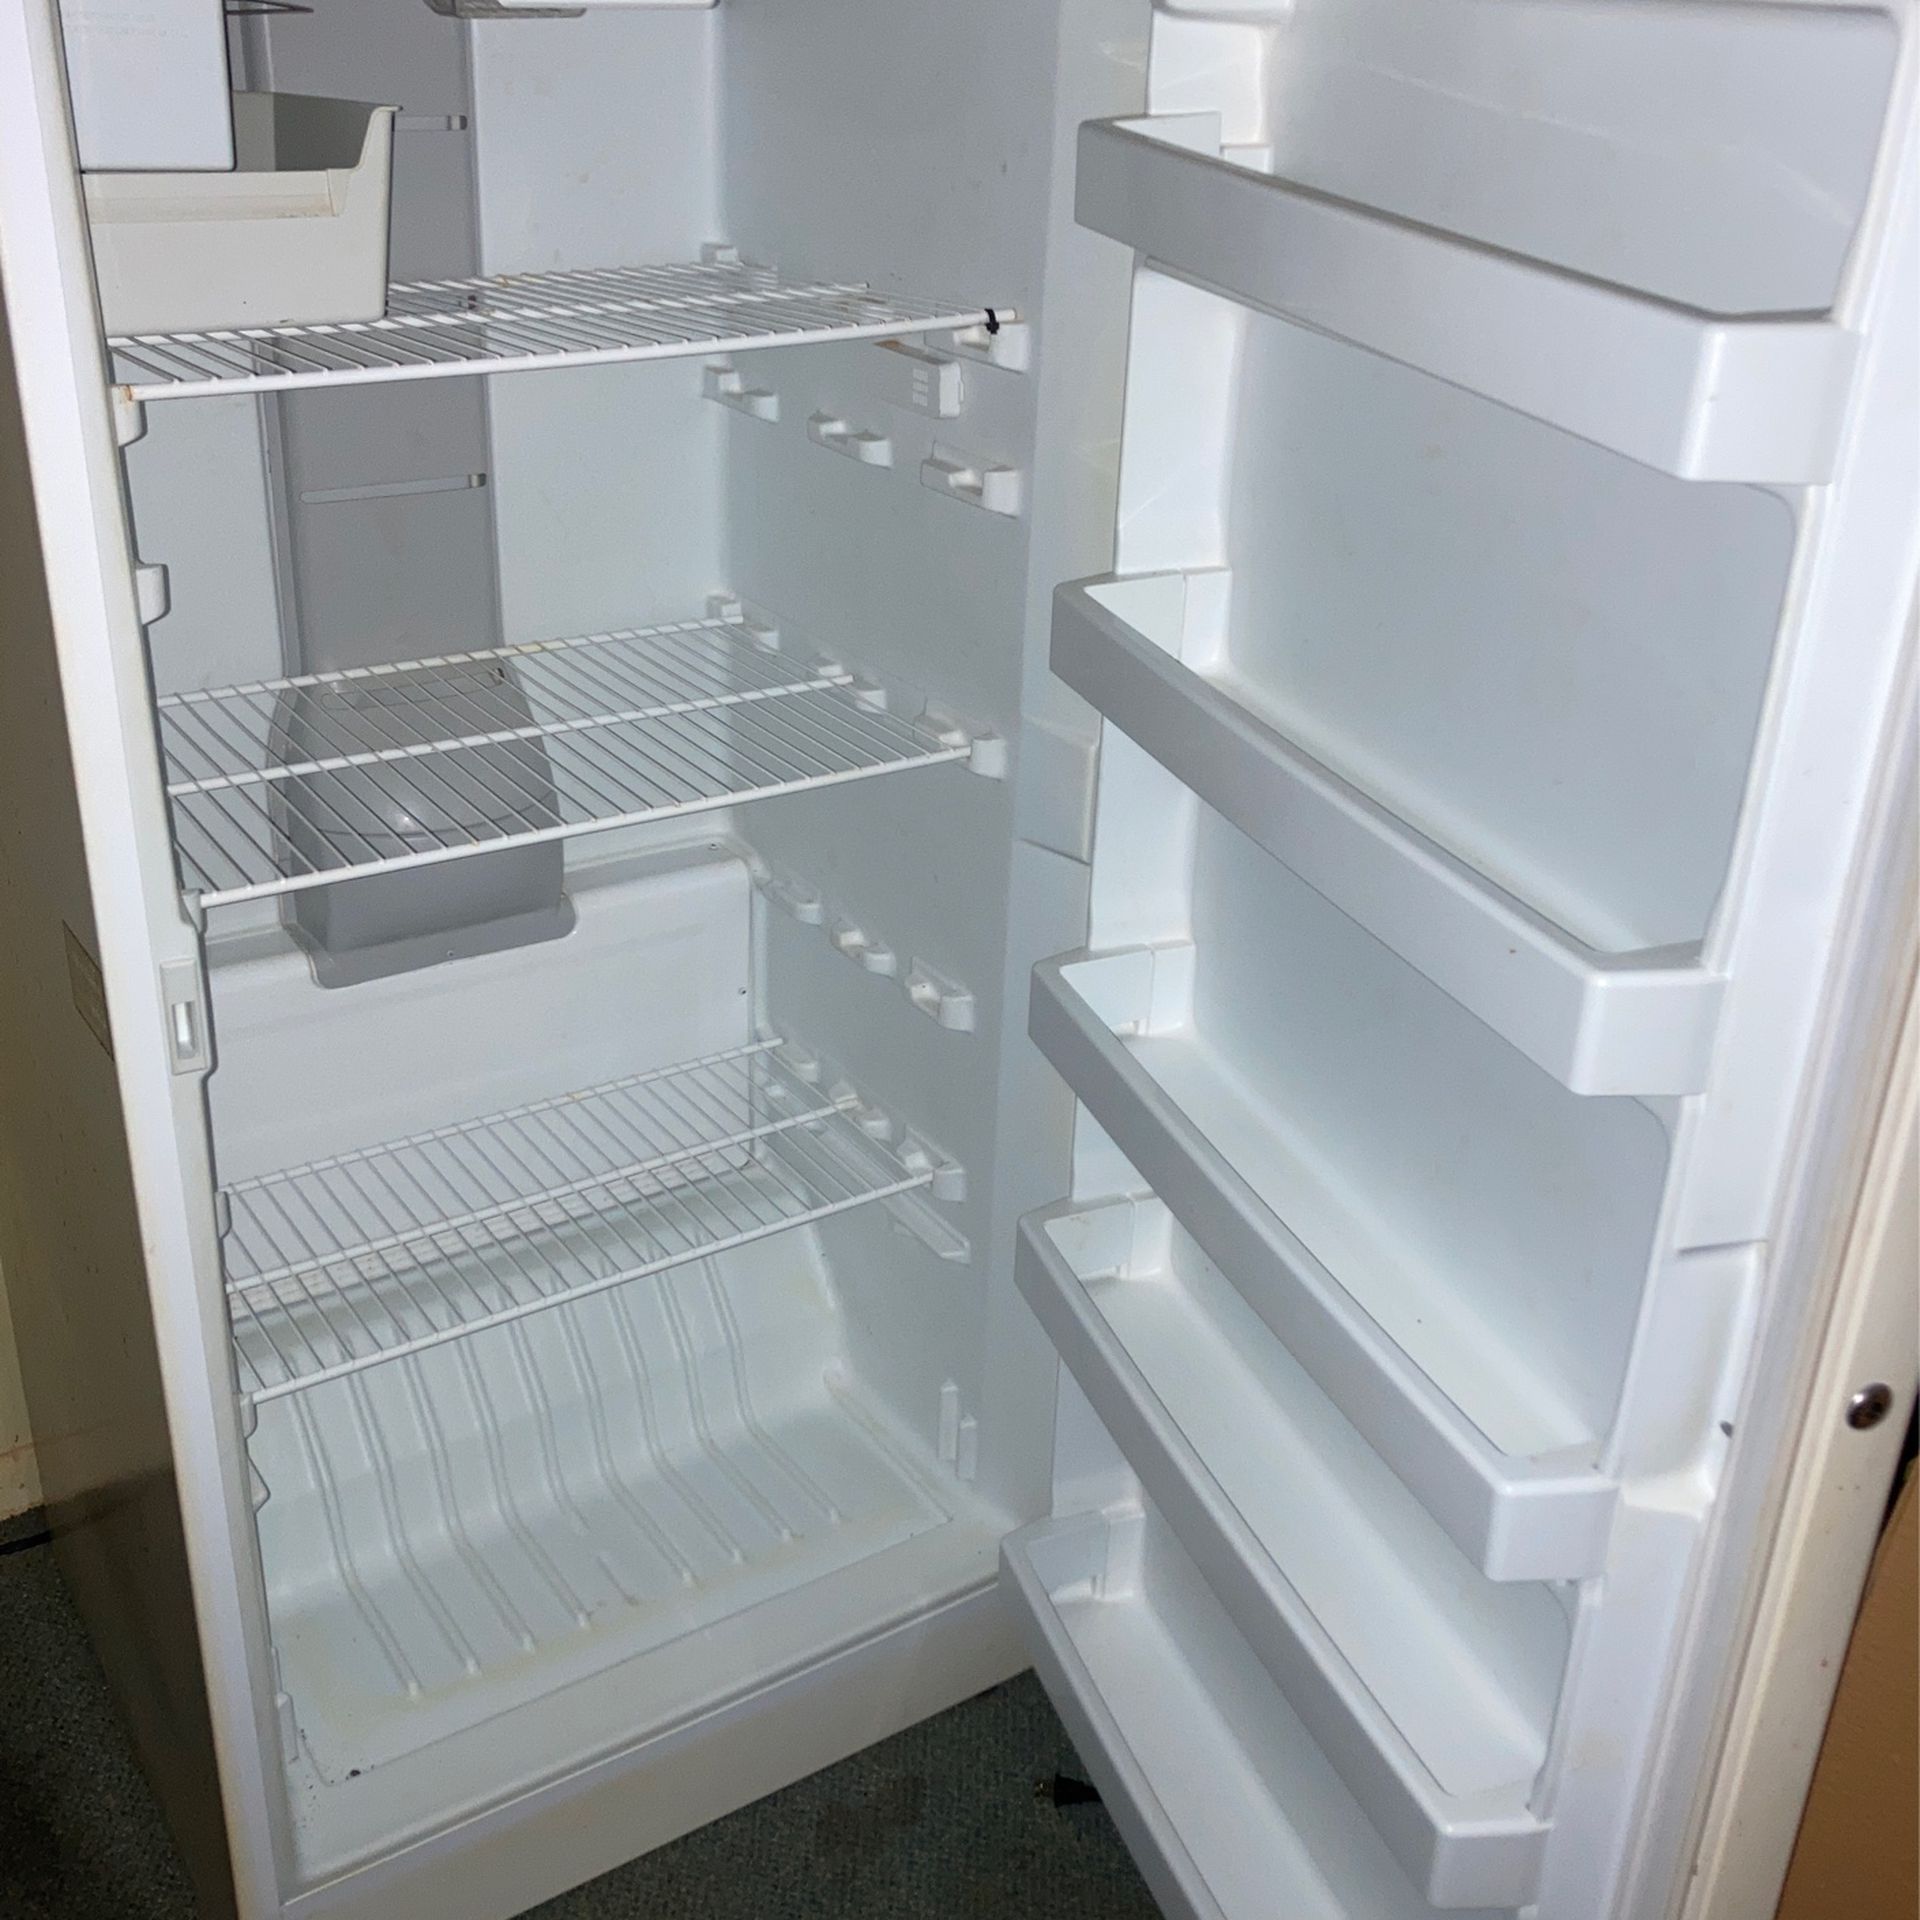 Whirlpool Upright Freezer Frost Free With Ice Maker For Sale In Hobe